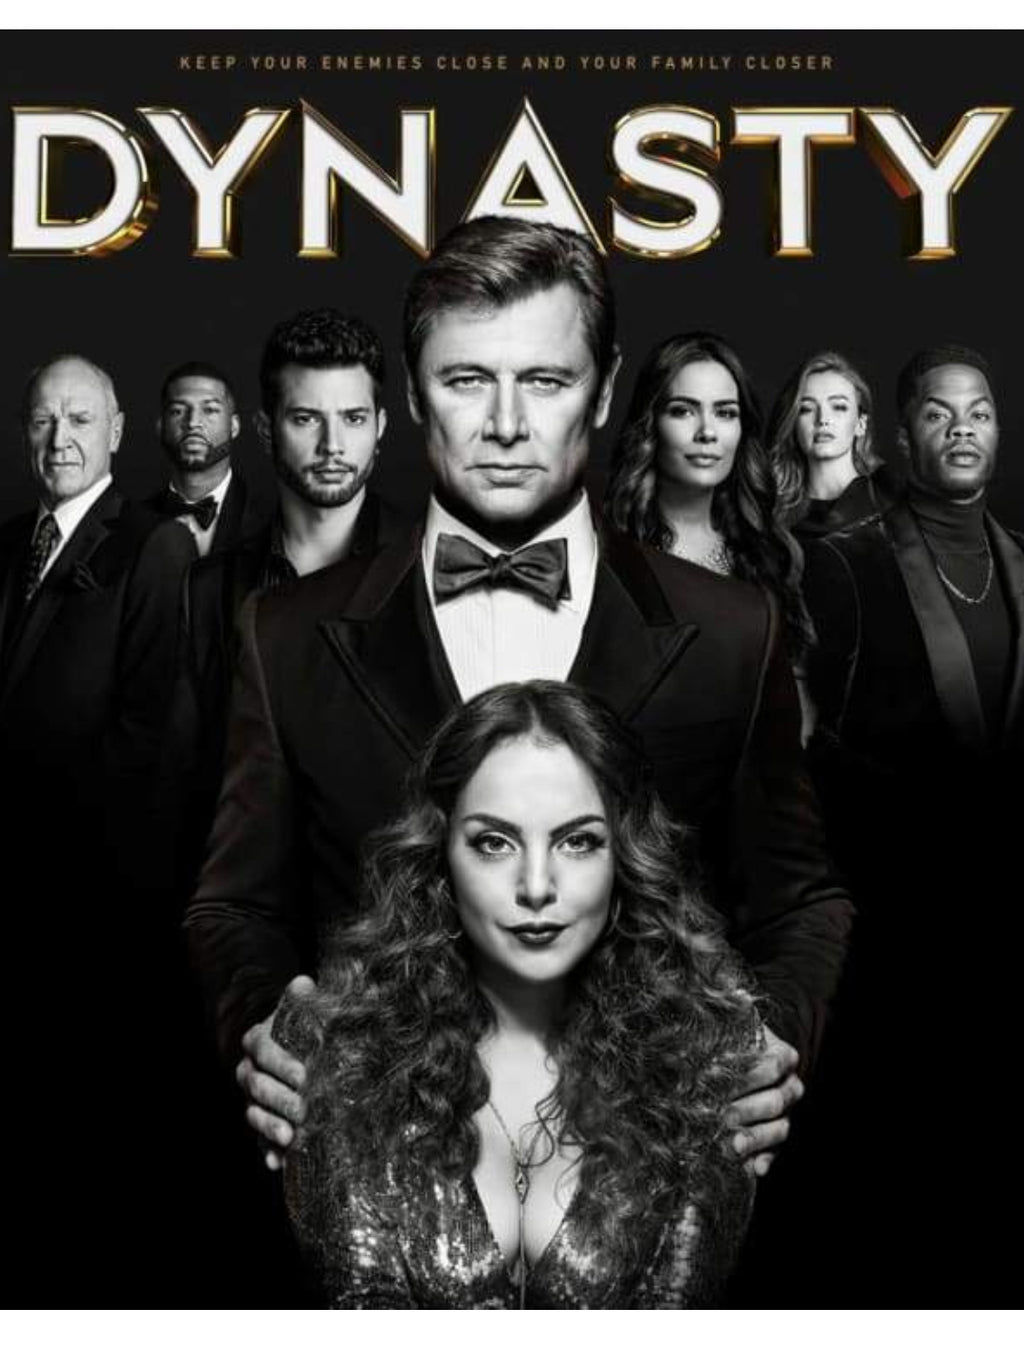 THE CW's DYNASTY